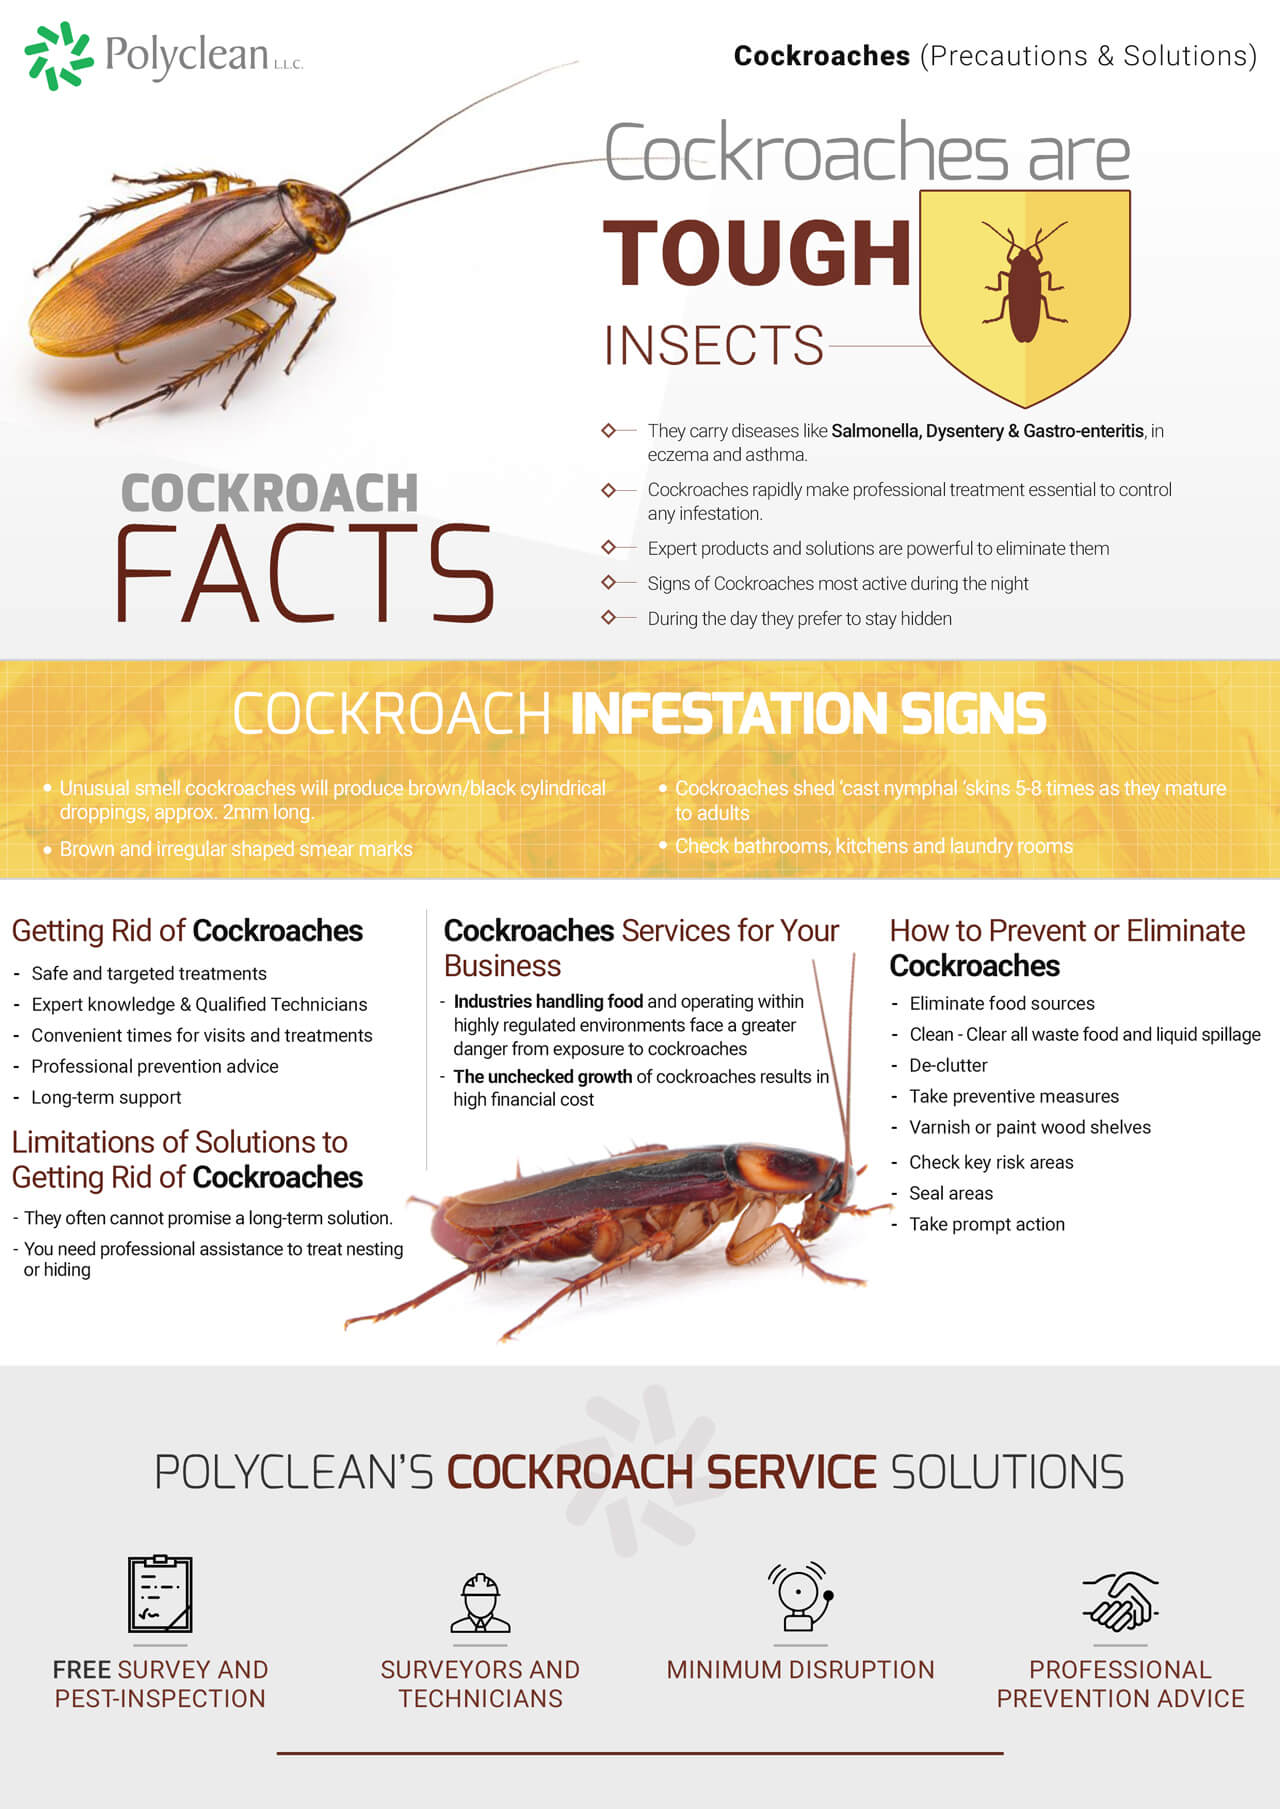 crawling-insects-cockroaches-2